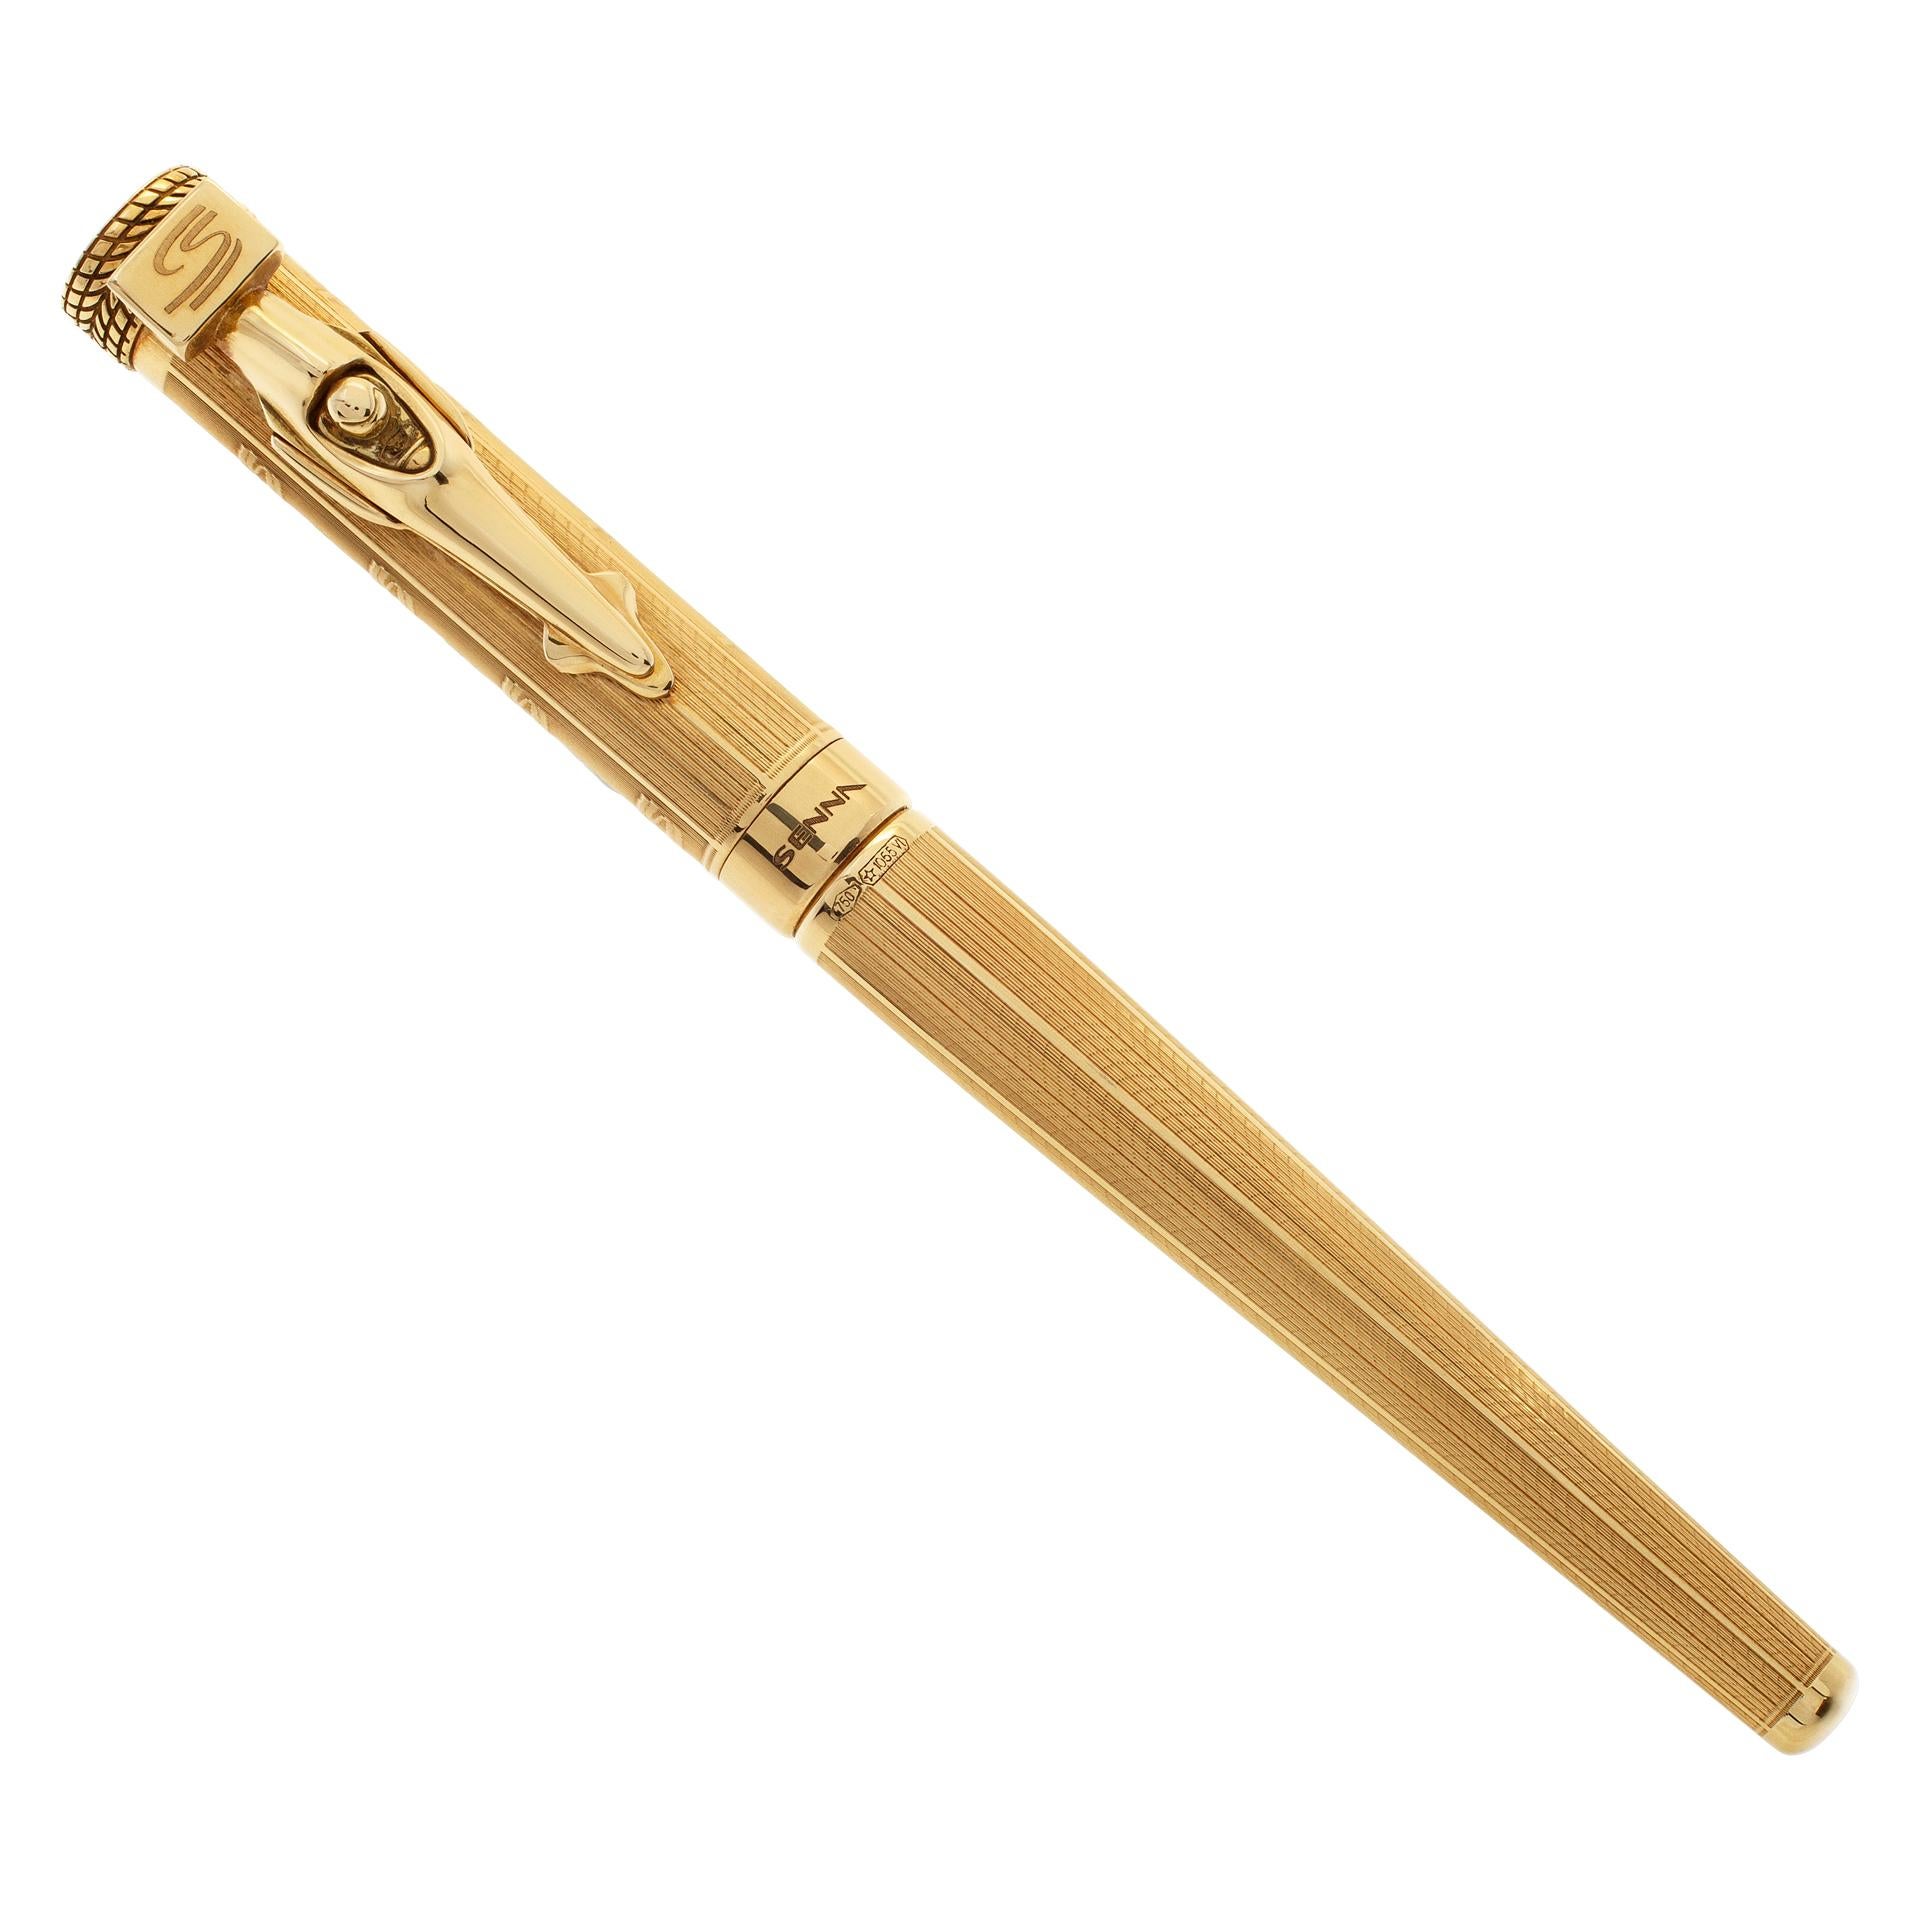 Extremely Collectible Montegrappa 